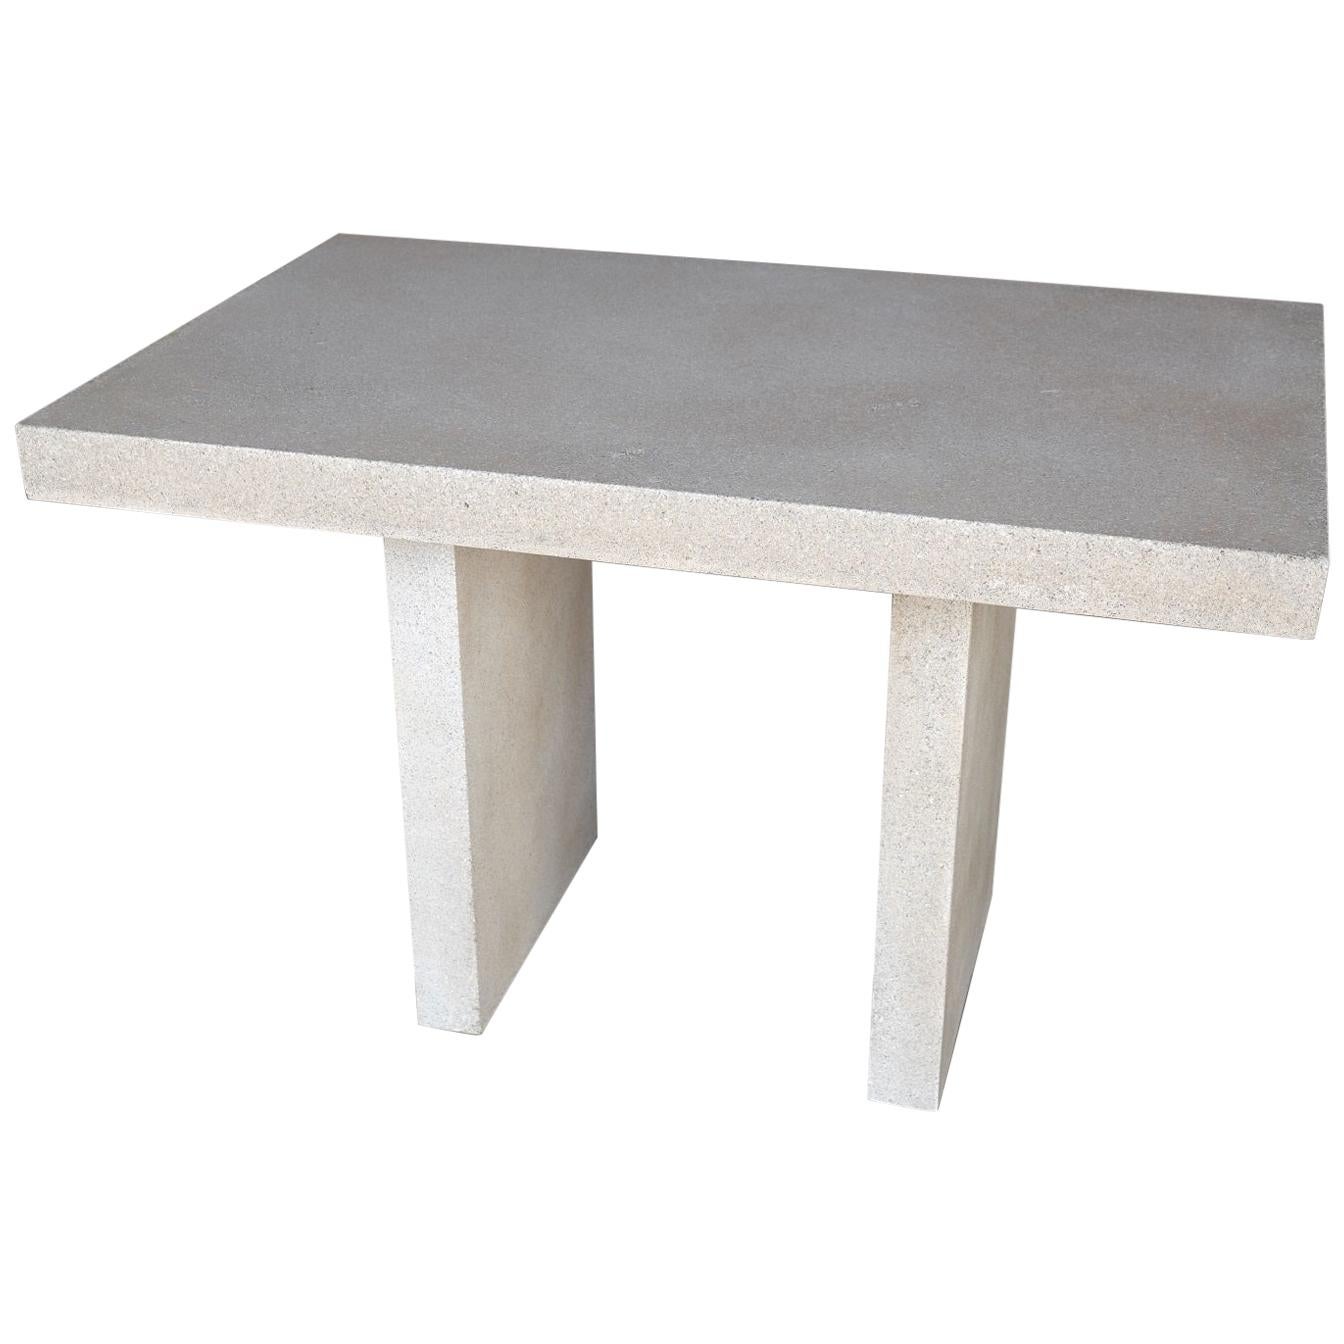 Cast Resin 'Ledge' Dining Table, Aged Stone Finish by Zachary A. Design For Sale